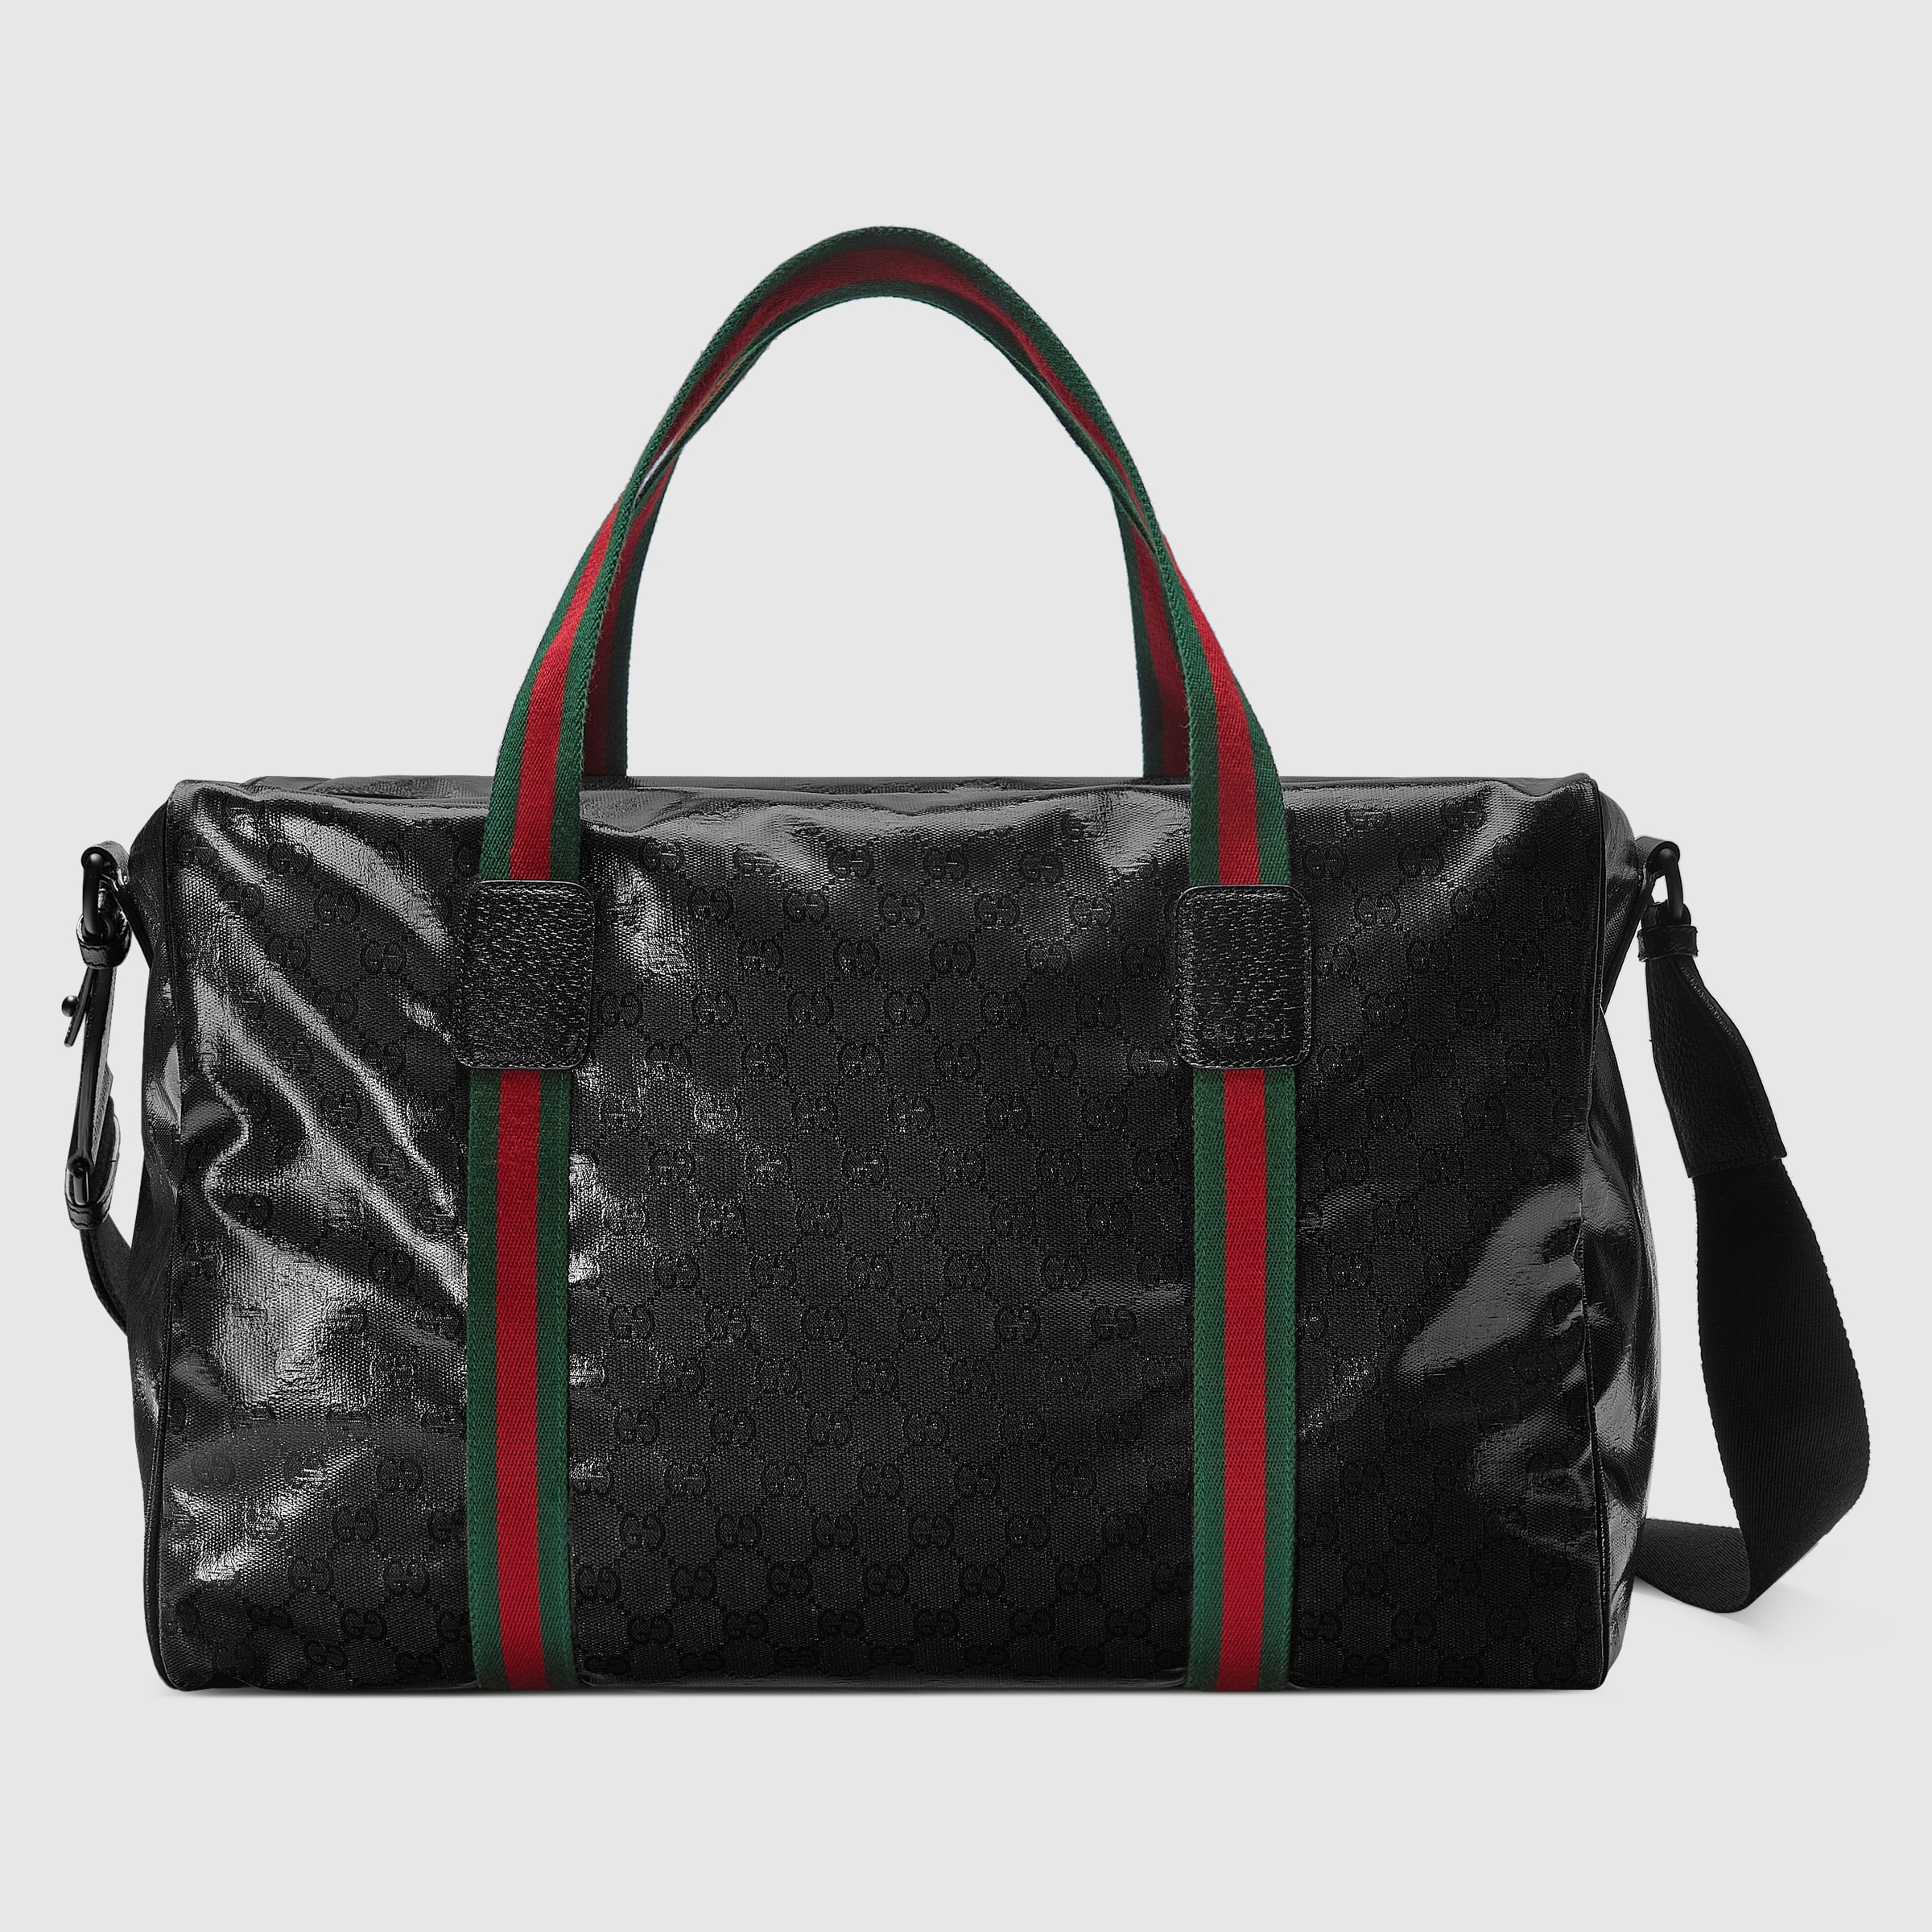 Gucci large duffle bag with web